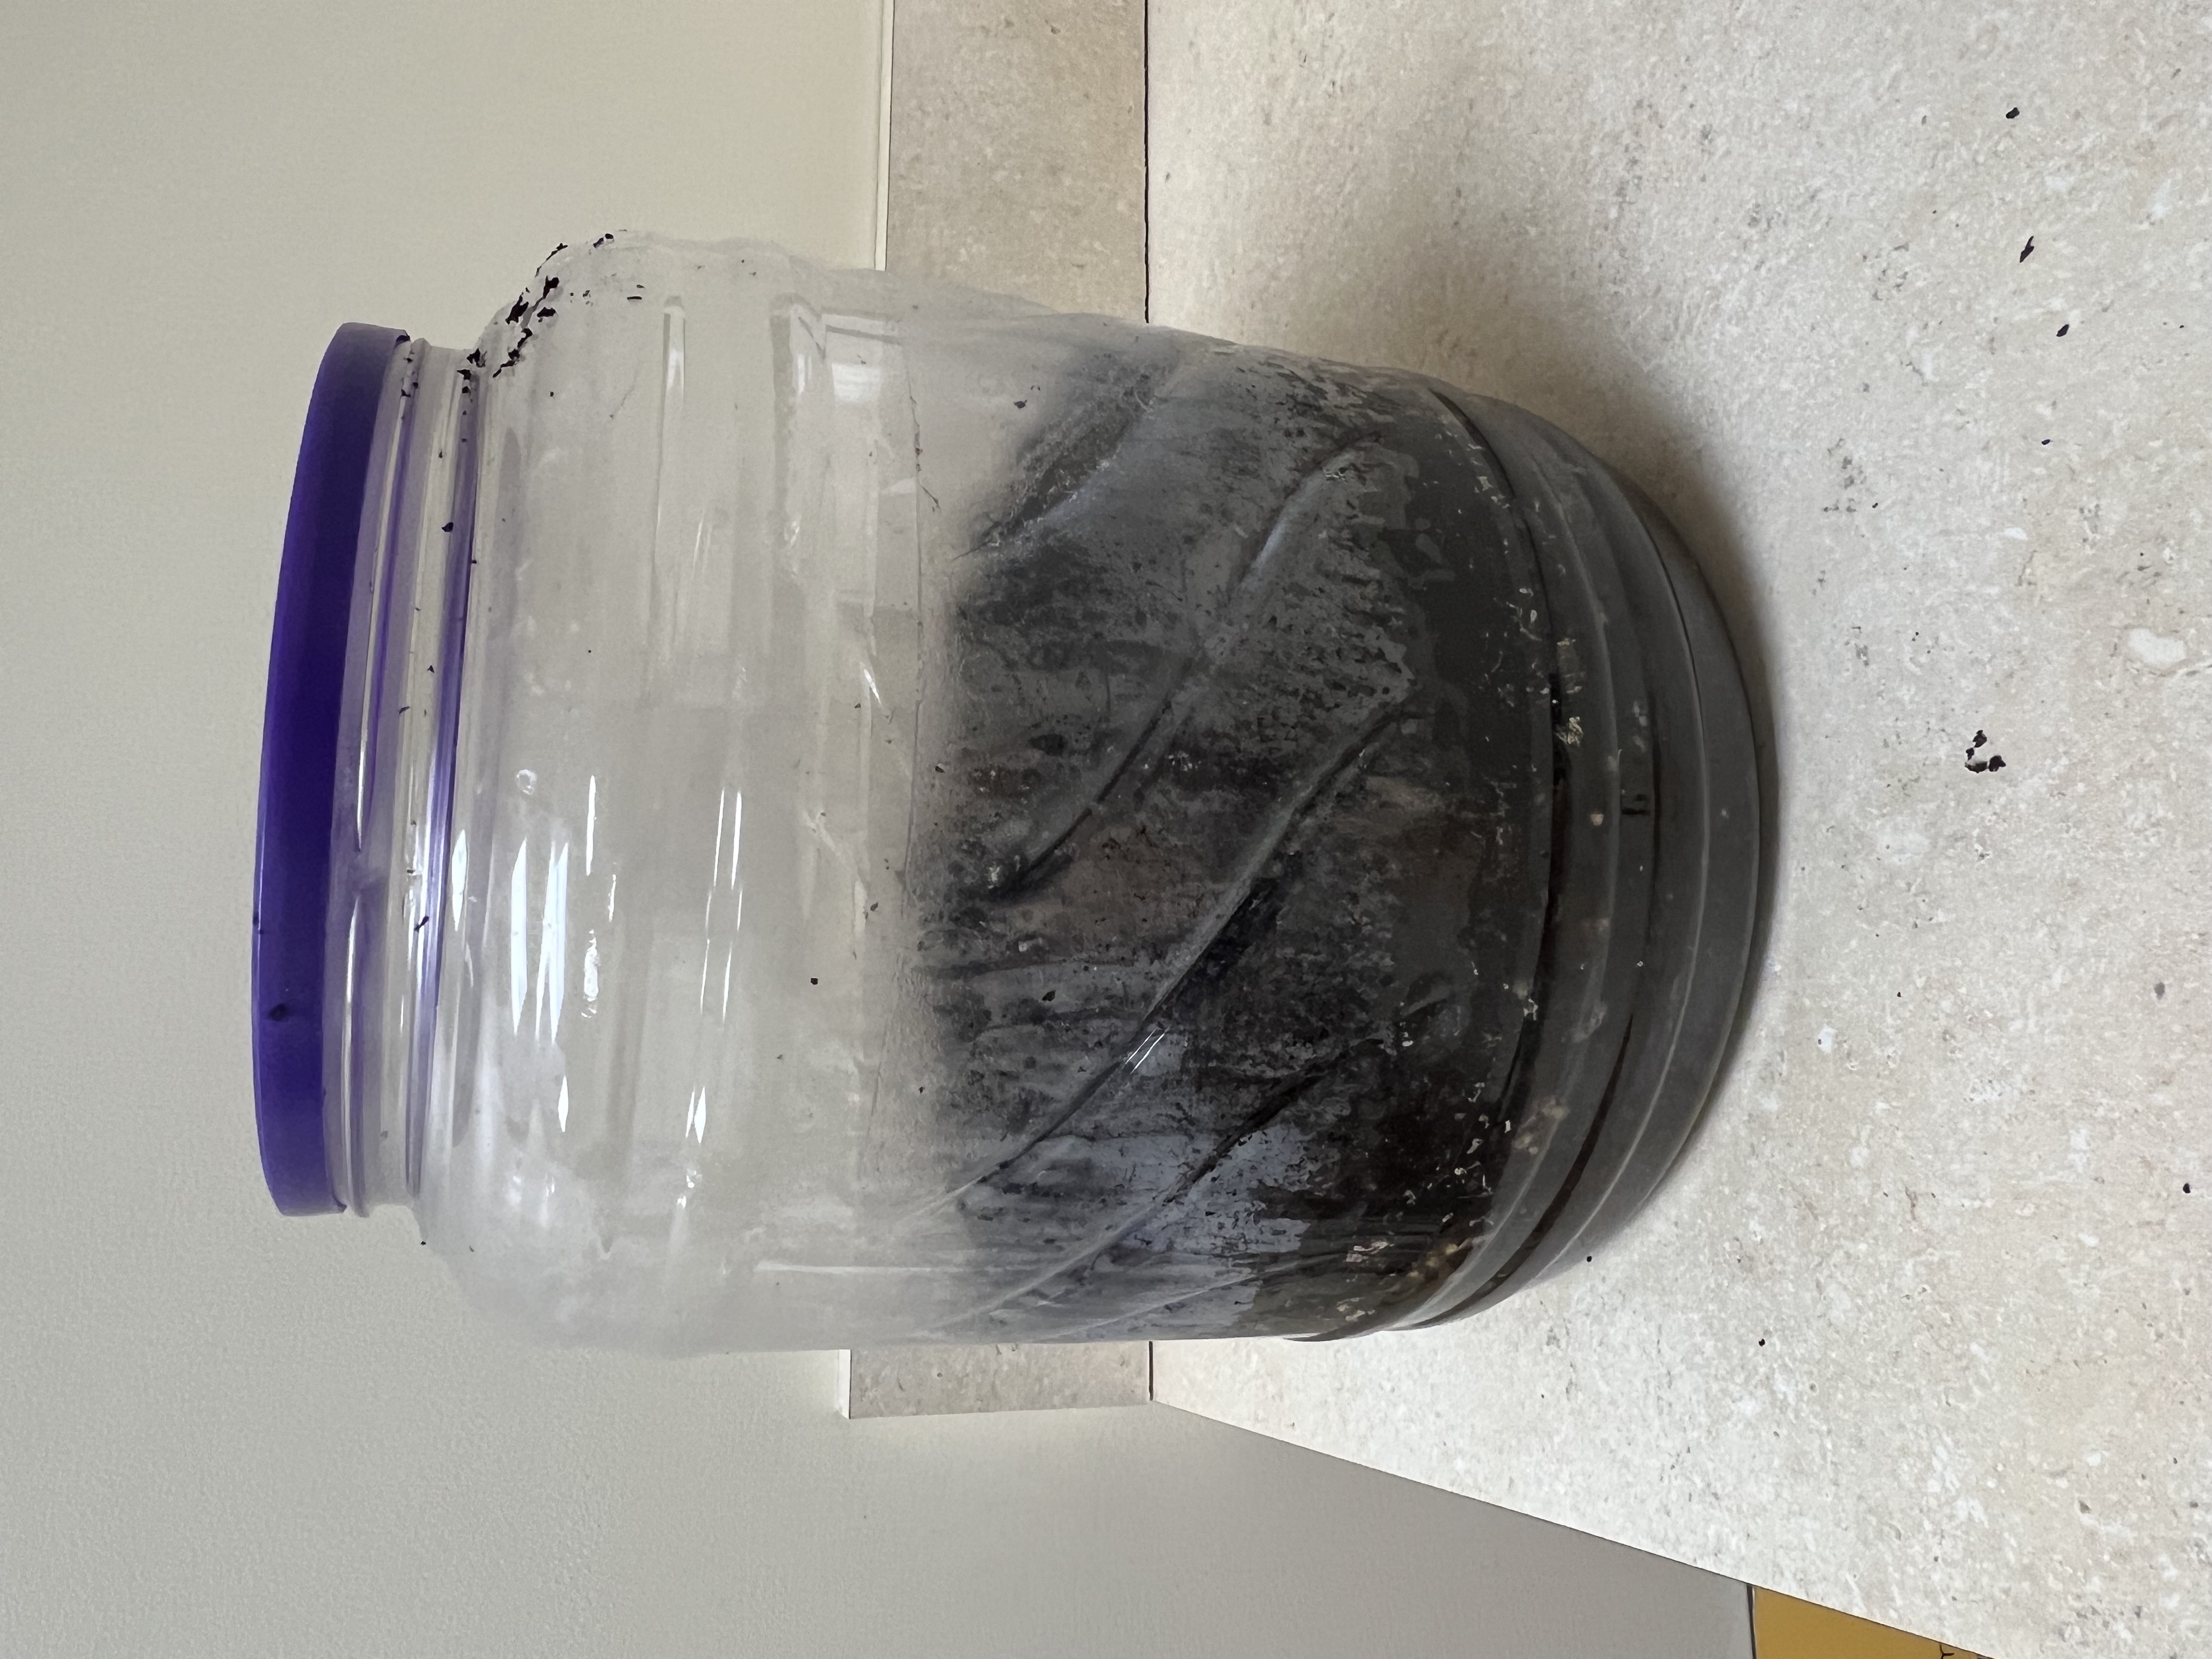 Clear plastic container with dirt